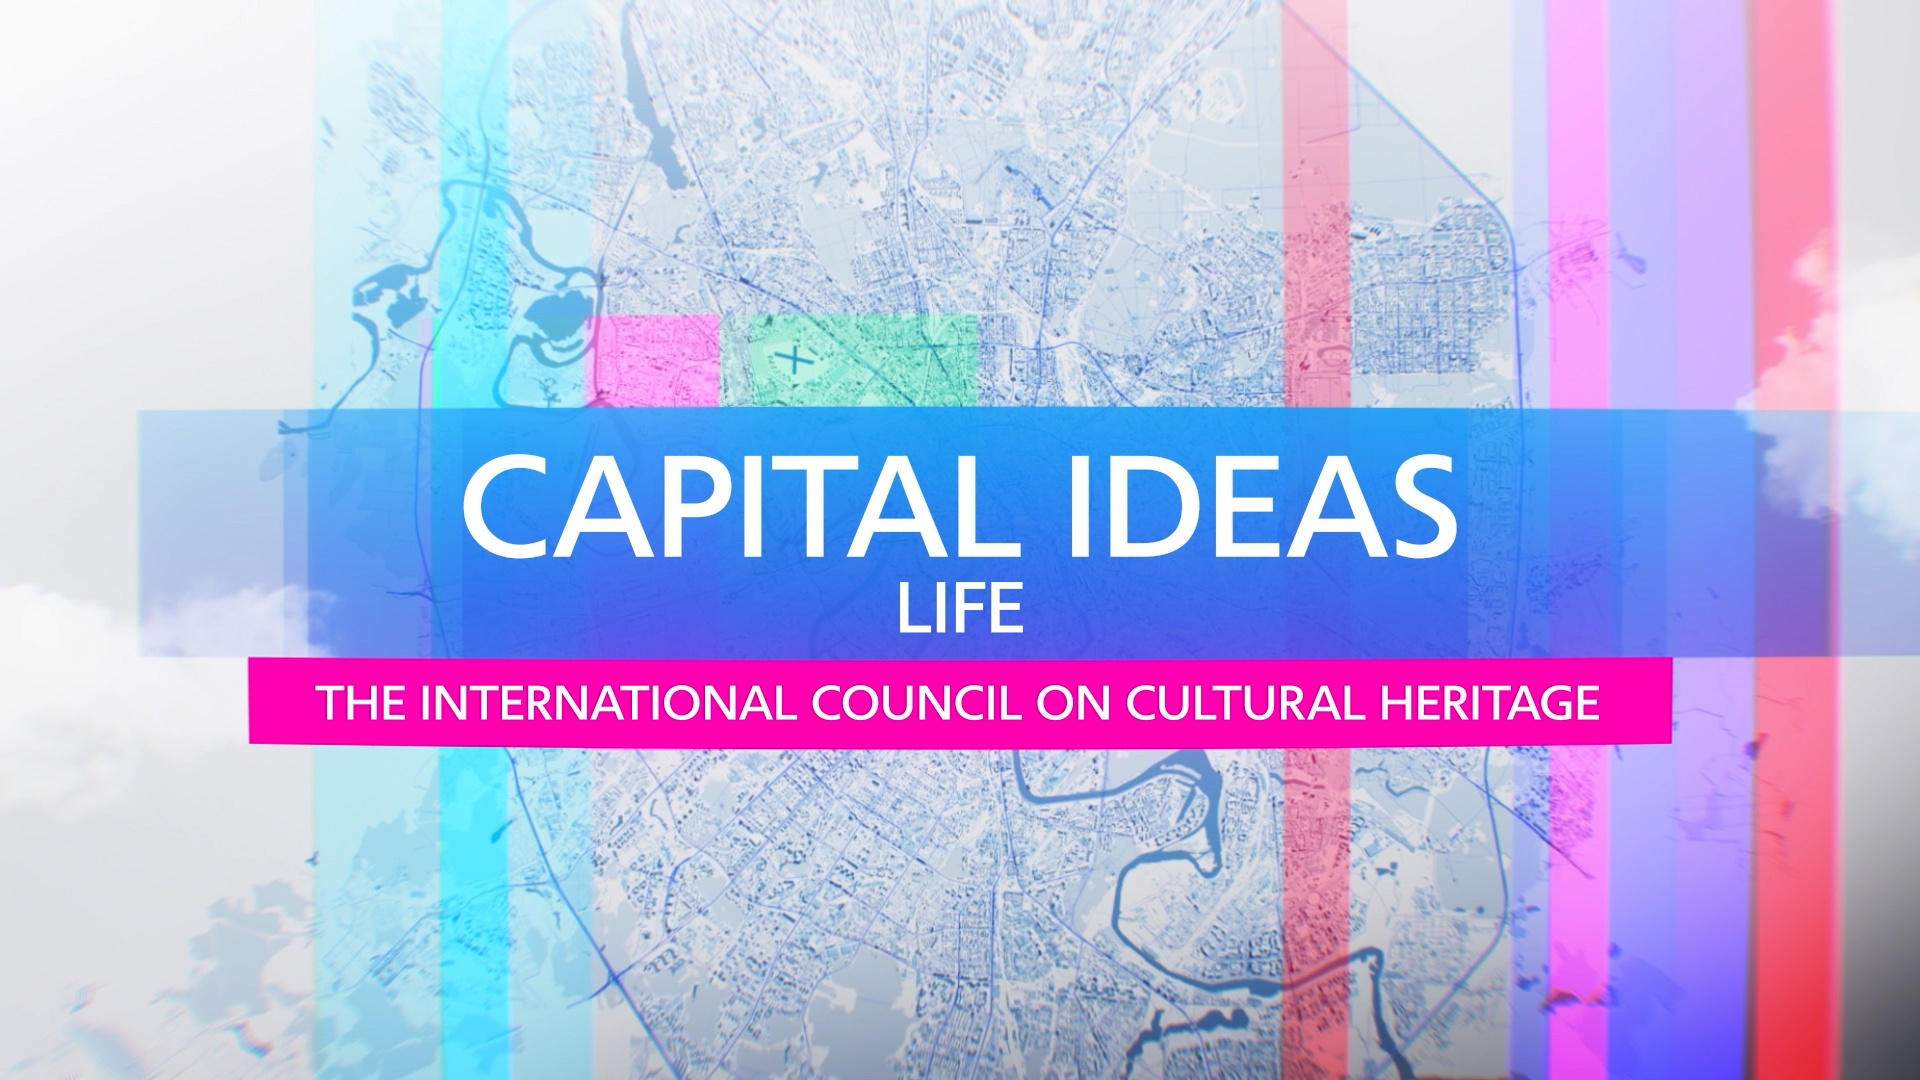 CAPITAL IDEAS LIFE  -  THE INTERNATIONAL COUNCIL ON CULTURAL HERITAGE